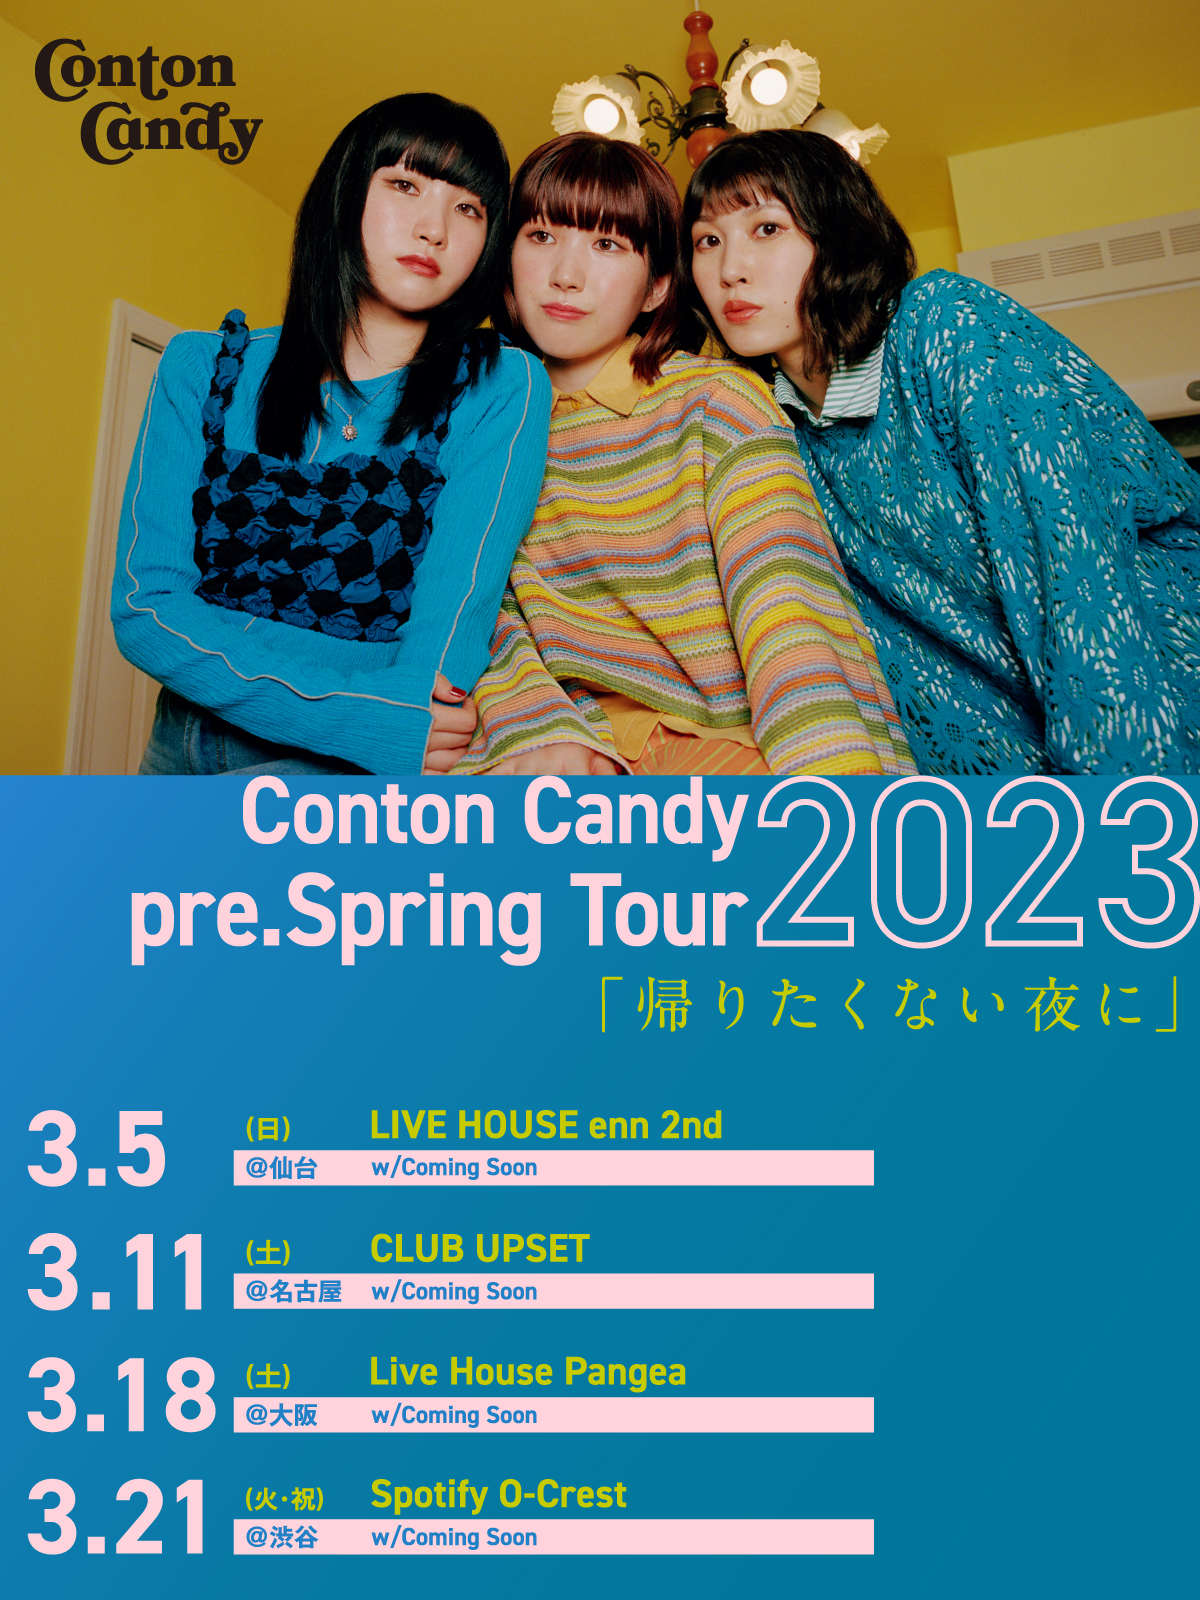 Conton Candy pre. Spring Tour 2023 「帰りたくない夜に」